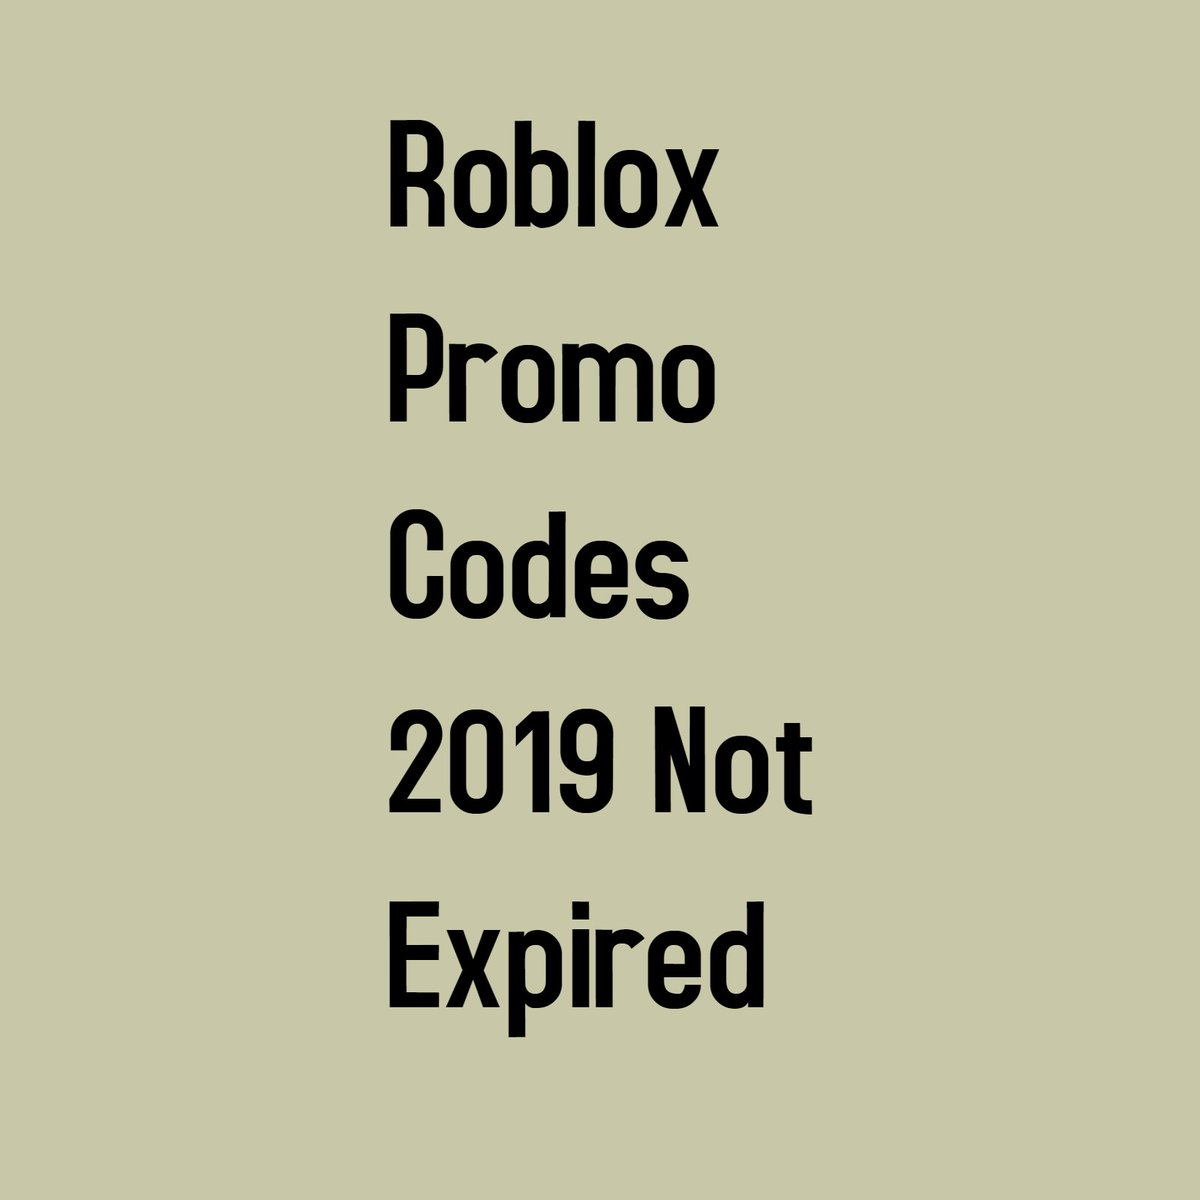 Robloxpromocodes2019notexpired Hashtag On Twitter - robloxpromocodes2019 hashtag on twitter